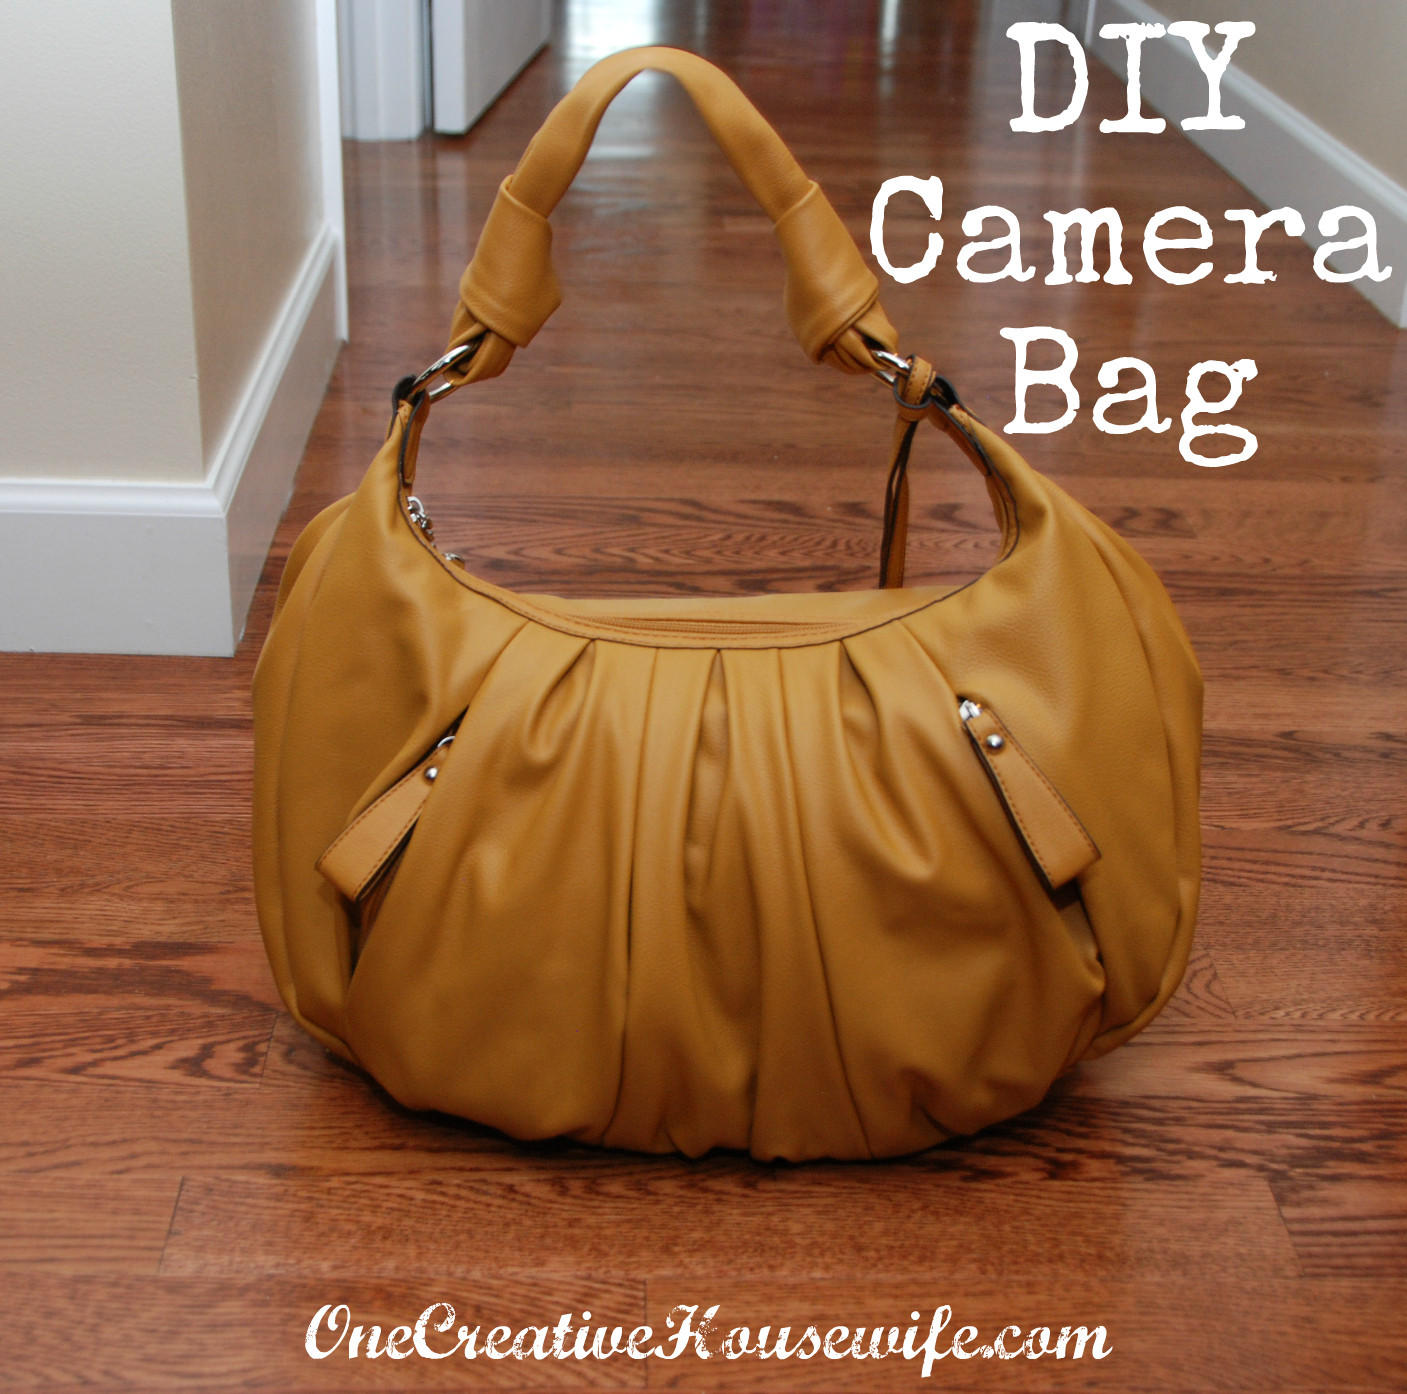 Best ideas about DIY Camera Bag
. Save or Pin e Creative Housewife DIY Camera Bag Now.